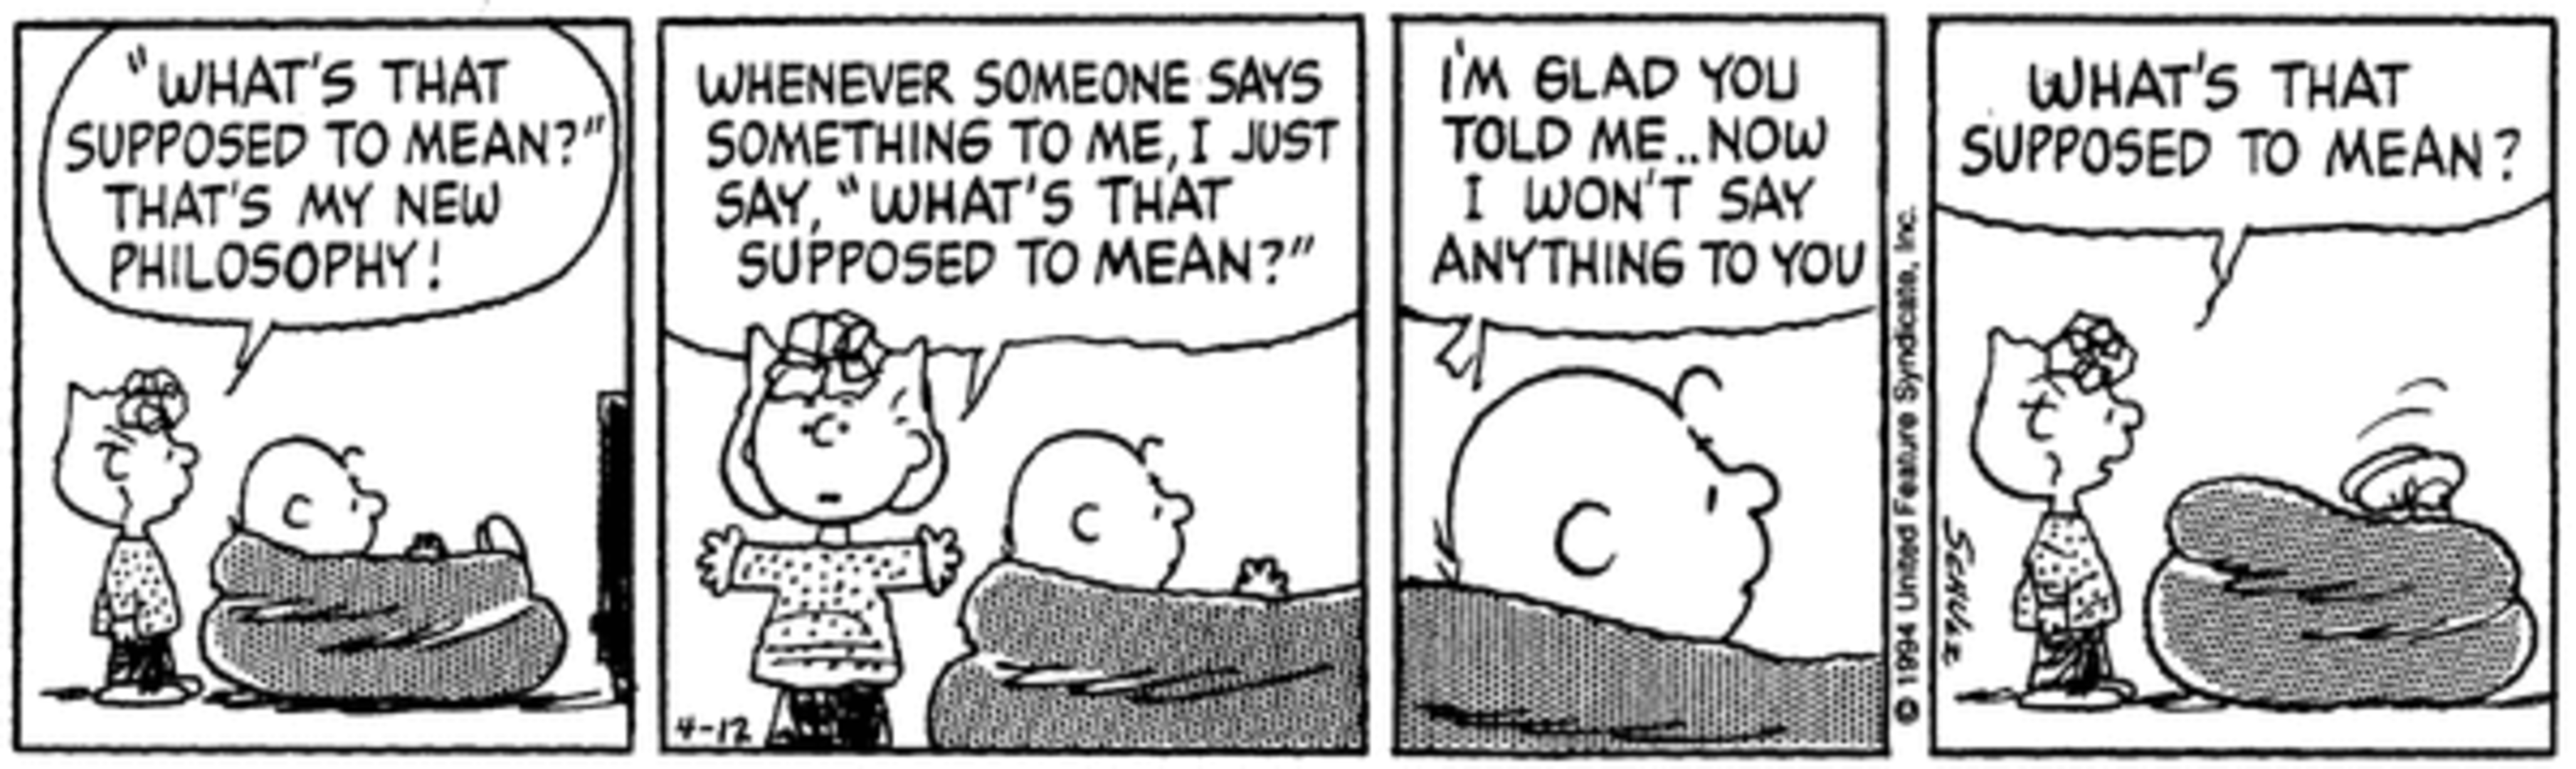 Peanuts, Sally's '90s catchphrase "what's that supposed to mean?"